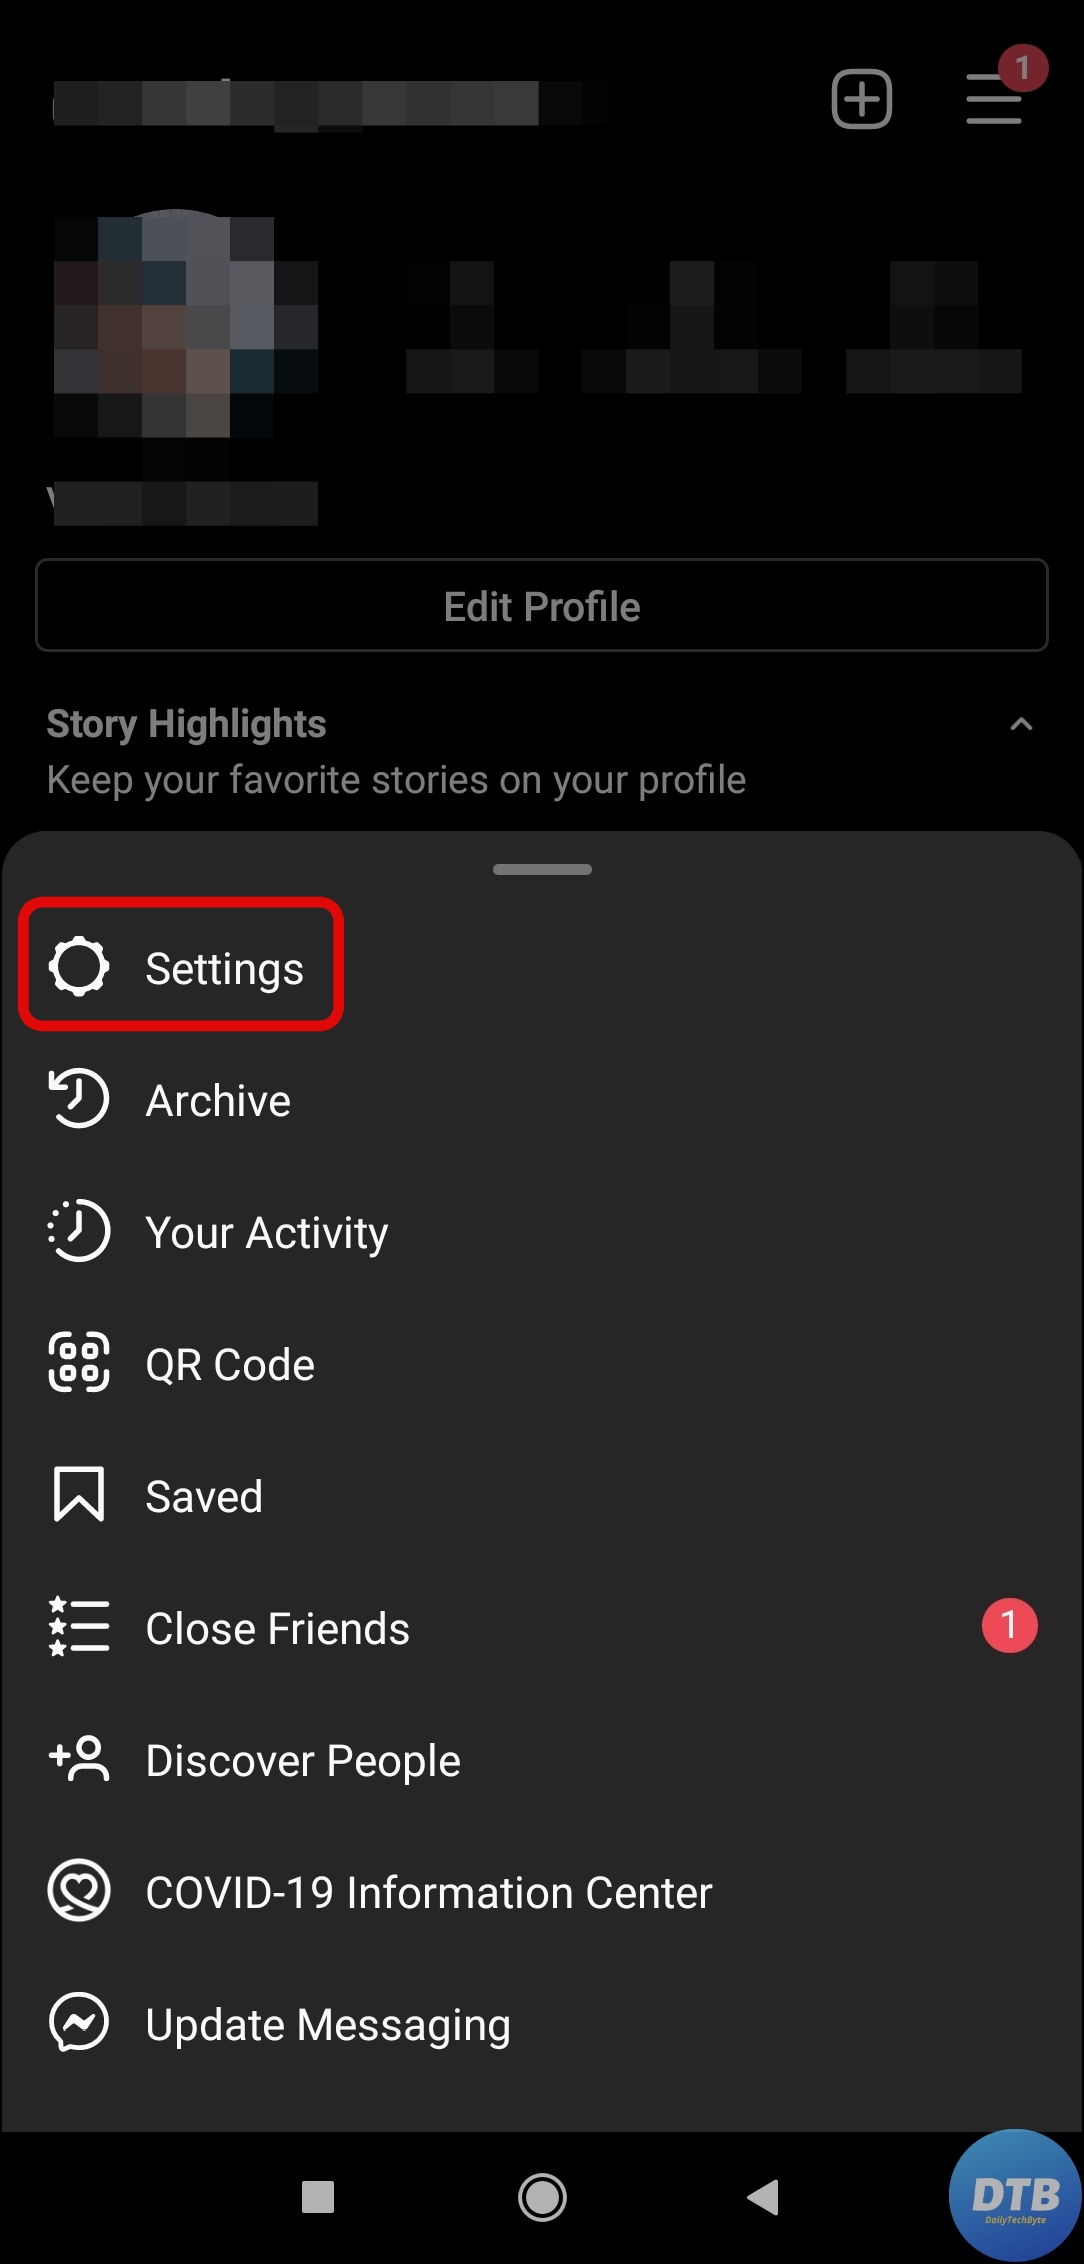 Contact Instagram Support to Fix Reels Option Not Showing on Instagram